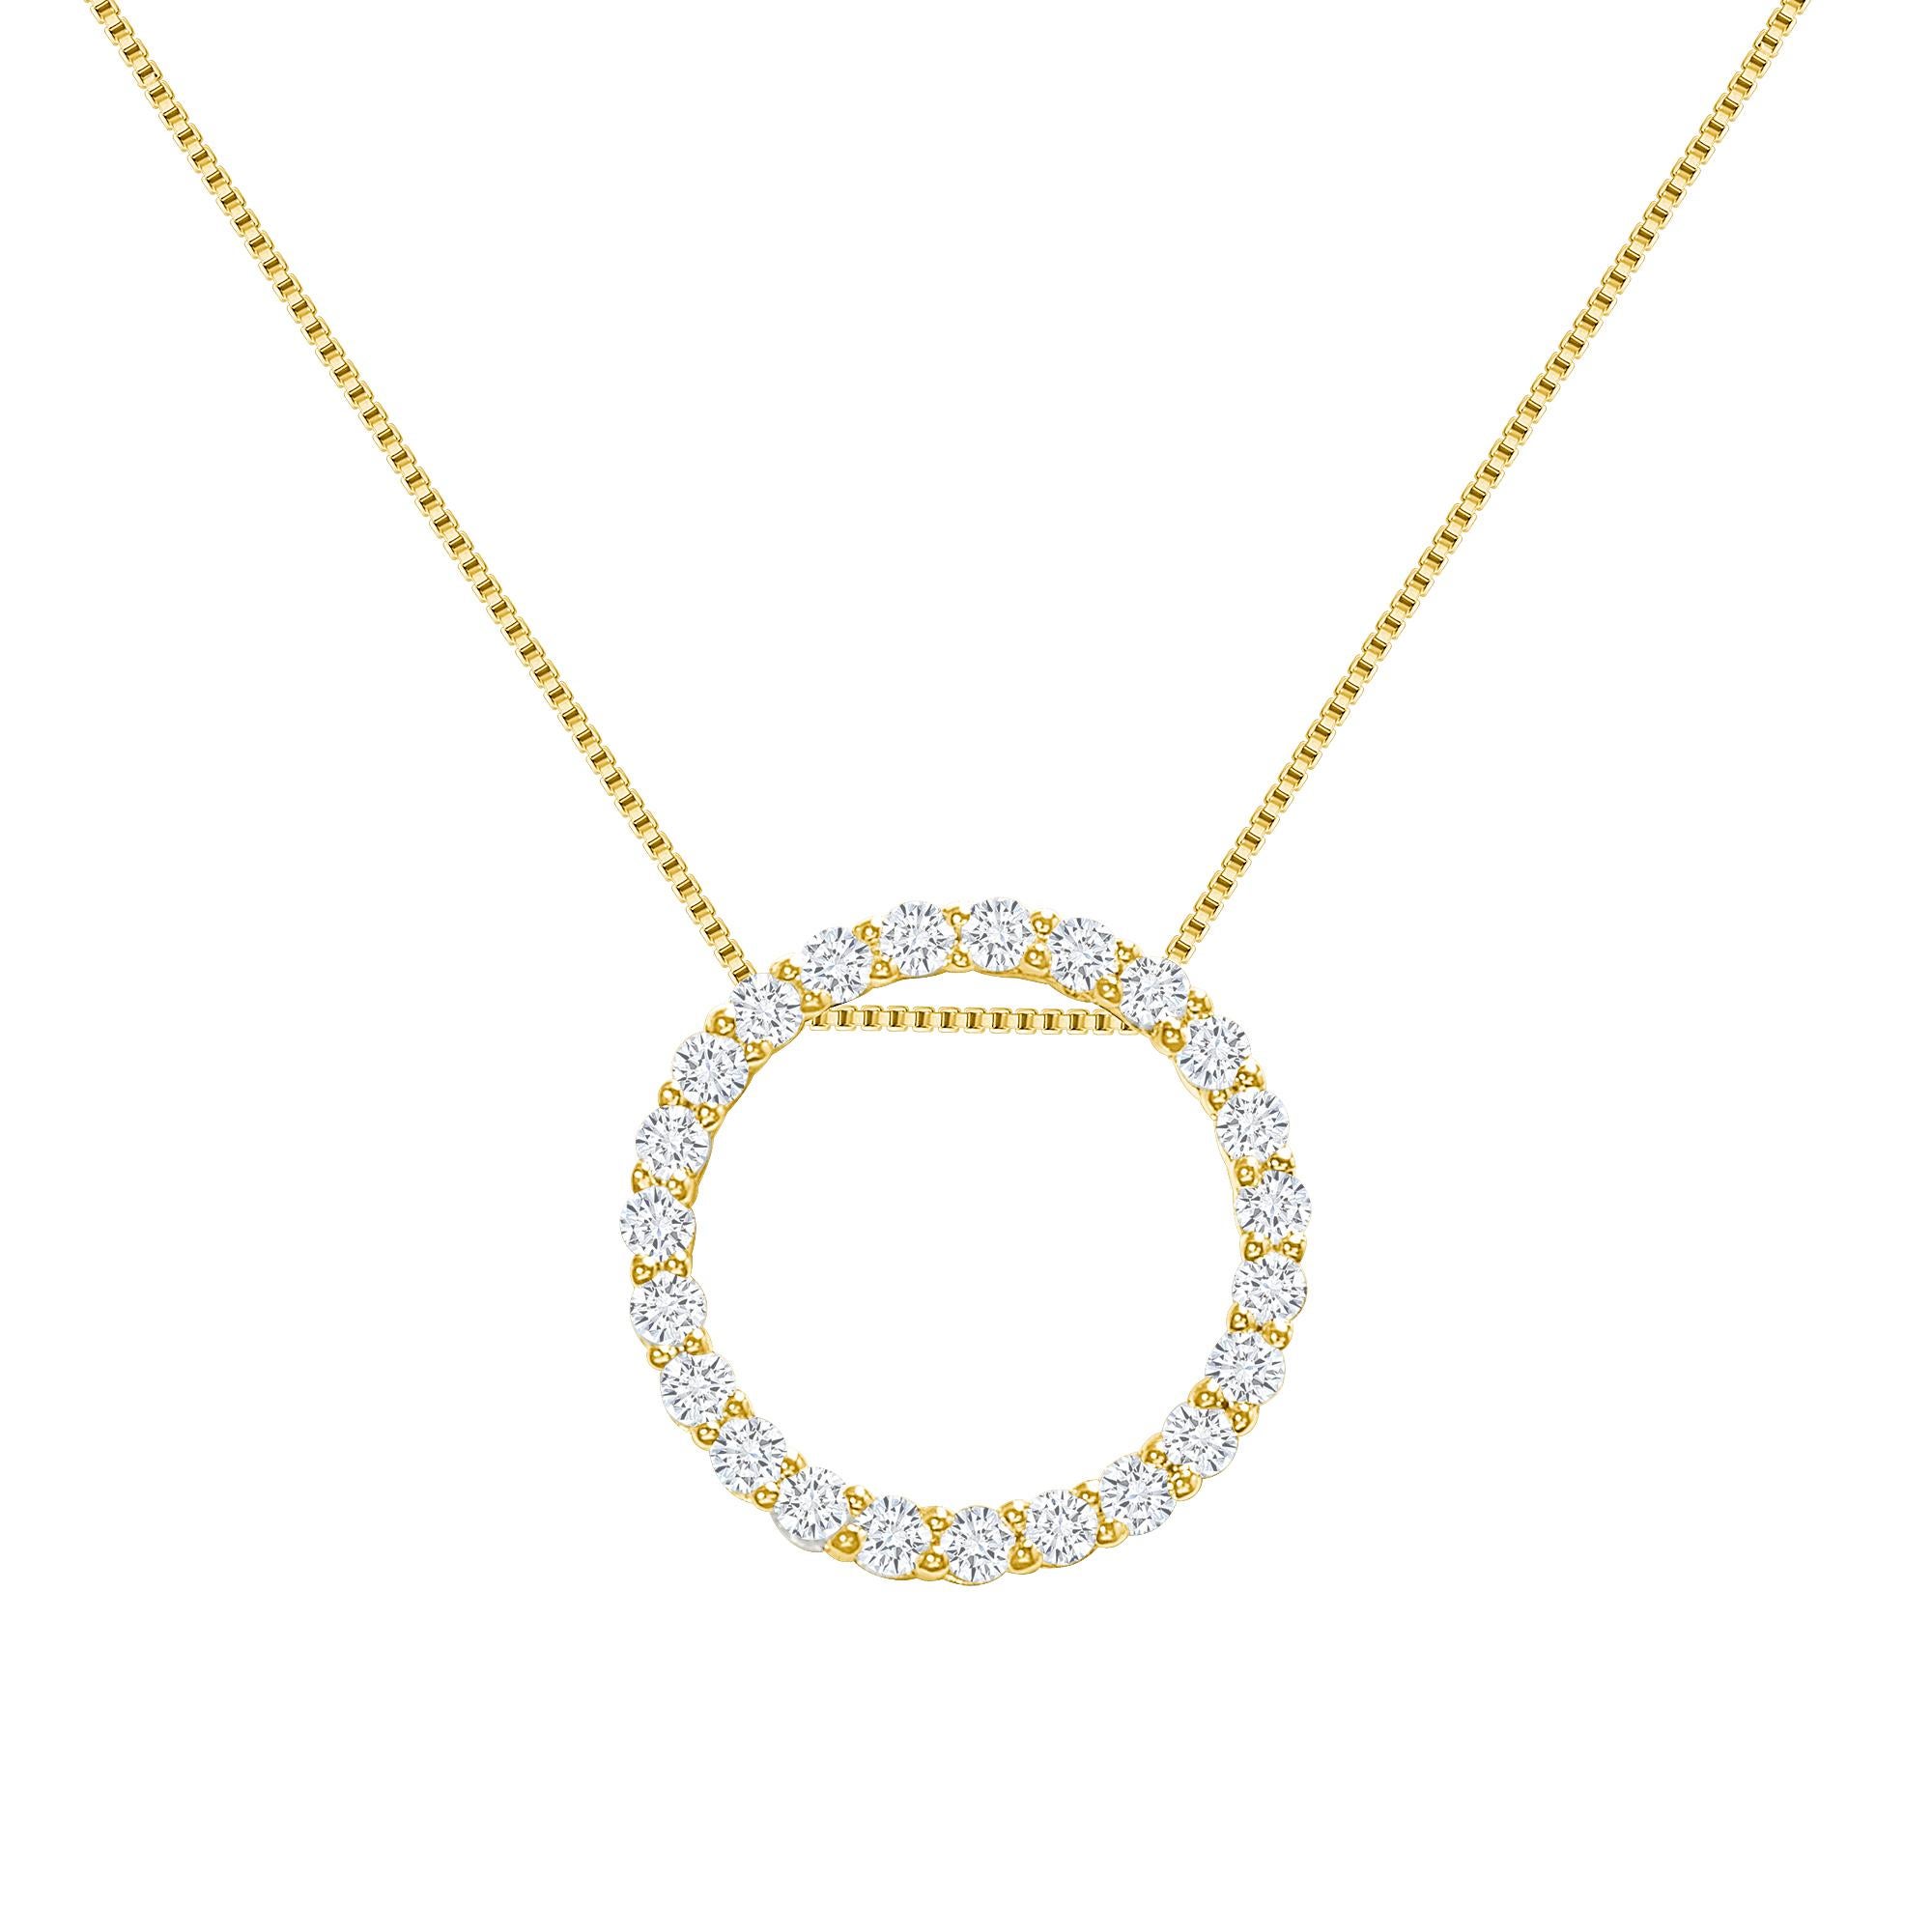 This diamond circle pendant provides a glowing chic look.
Metal: 14k Gold
Diamond Total Carats: 2 carat
Diamond Cut: Round Natural Diamonds (Not Lab Grown)
Diamond Clarity: VS
Diamond Color: F-G
Color: Yellow Gold
Necklace Length: 20 inches